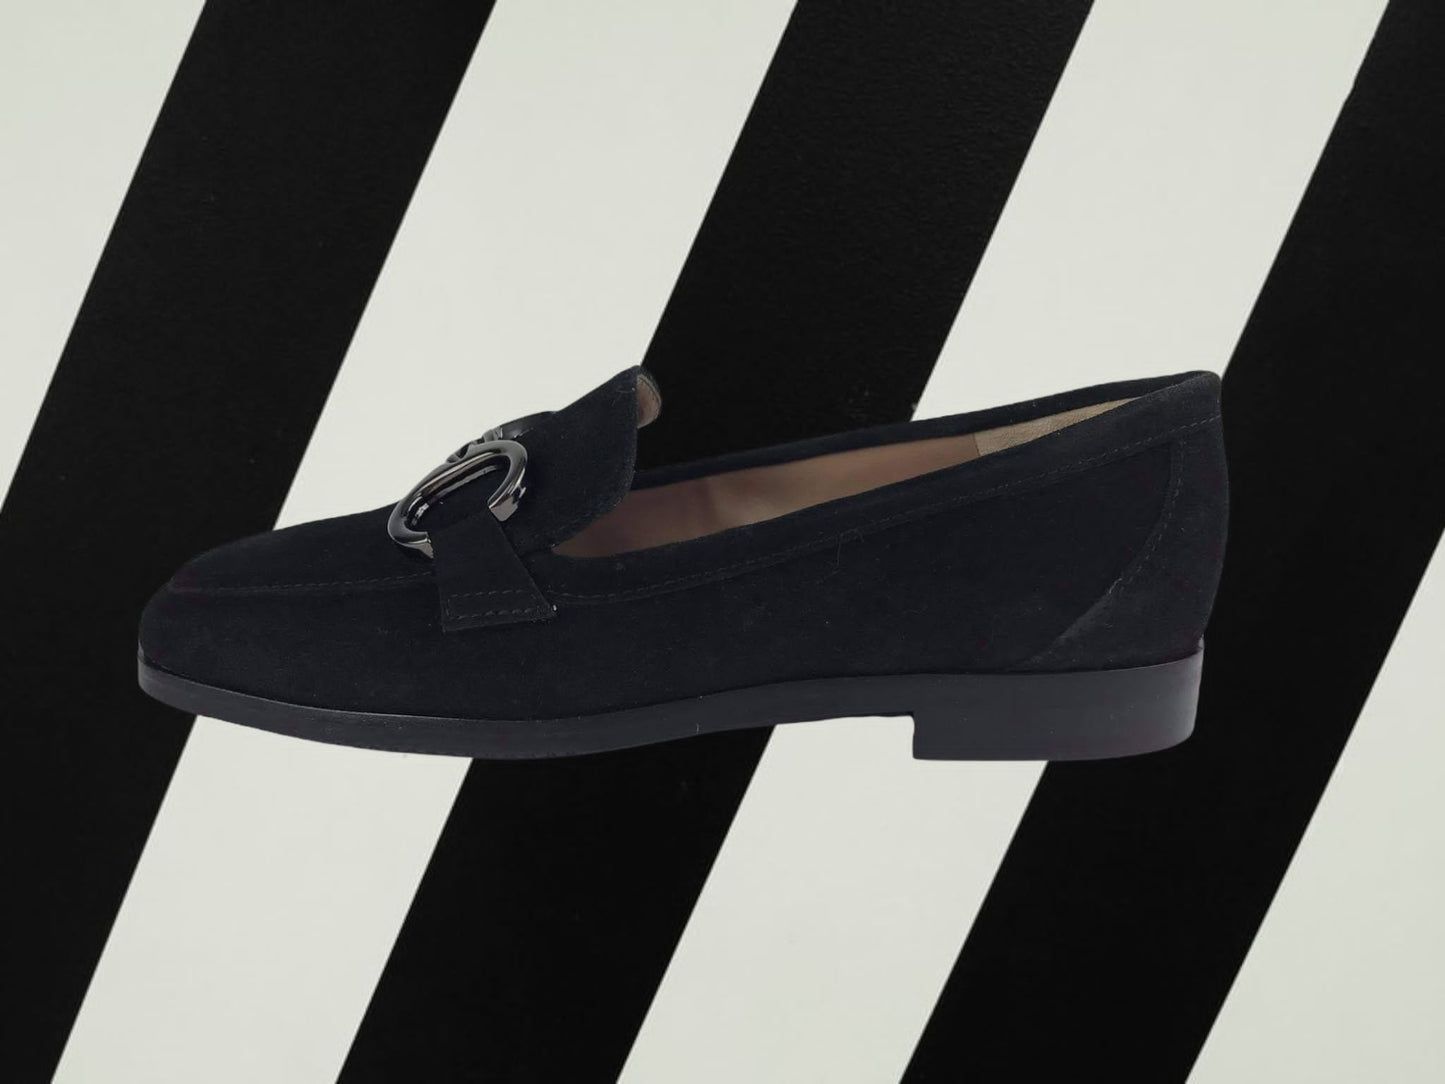 Plumers | Laura men's flat loafers, black suede leather